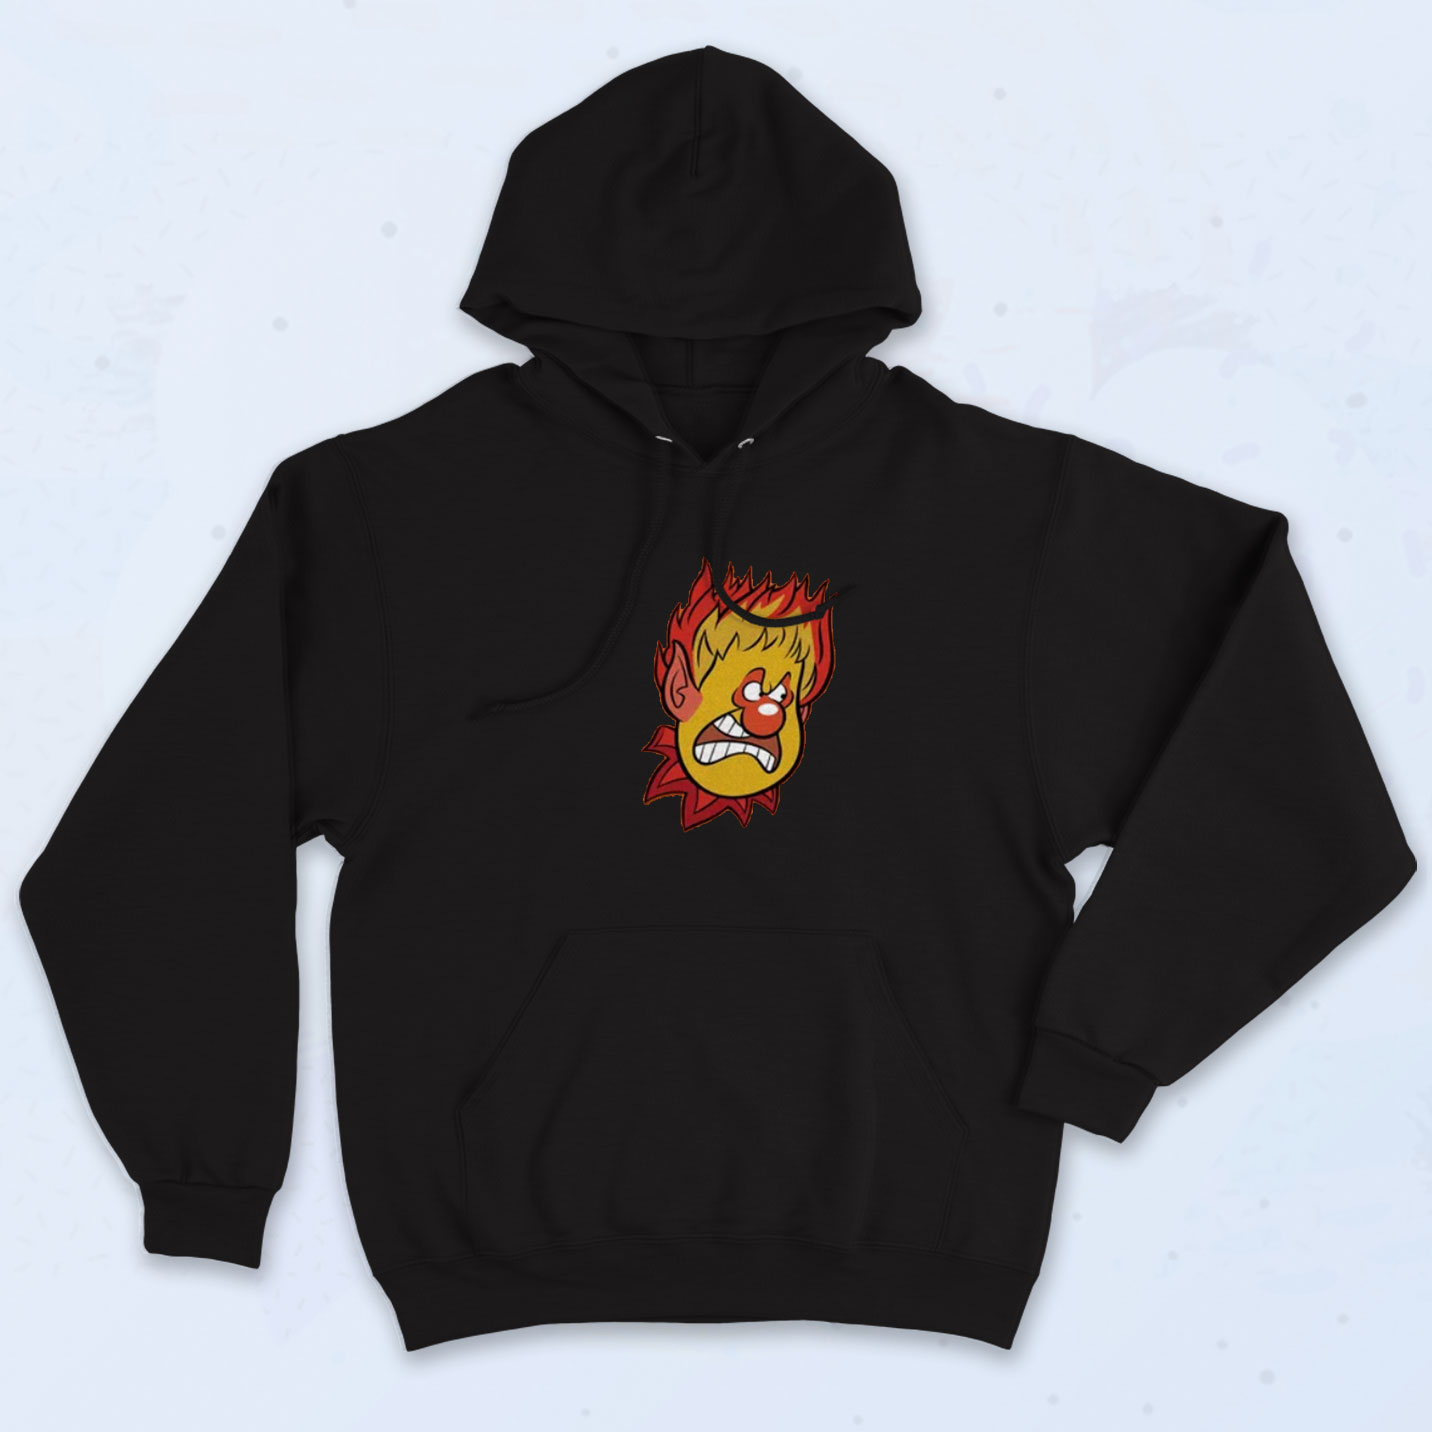 Heat Miser Angry Graphic Hoodie - 90sclothes.com